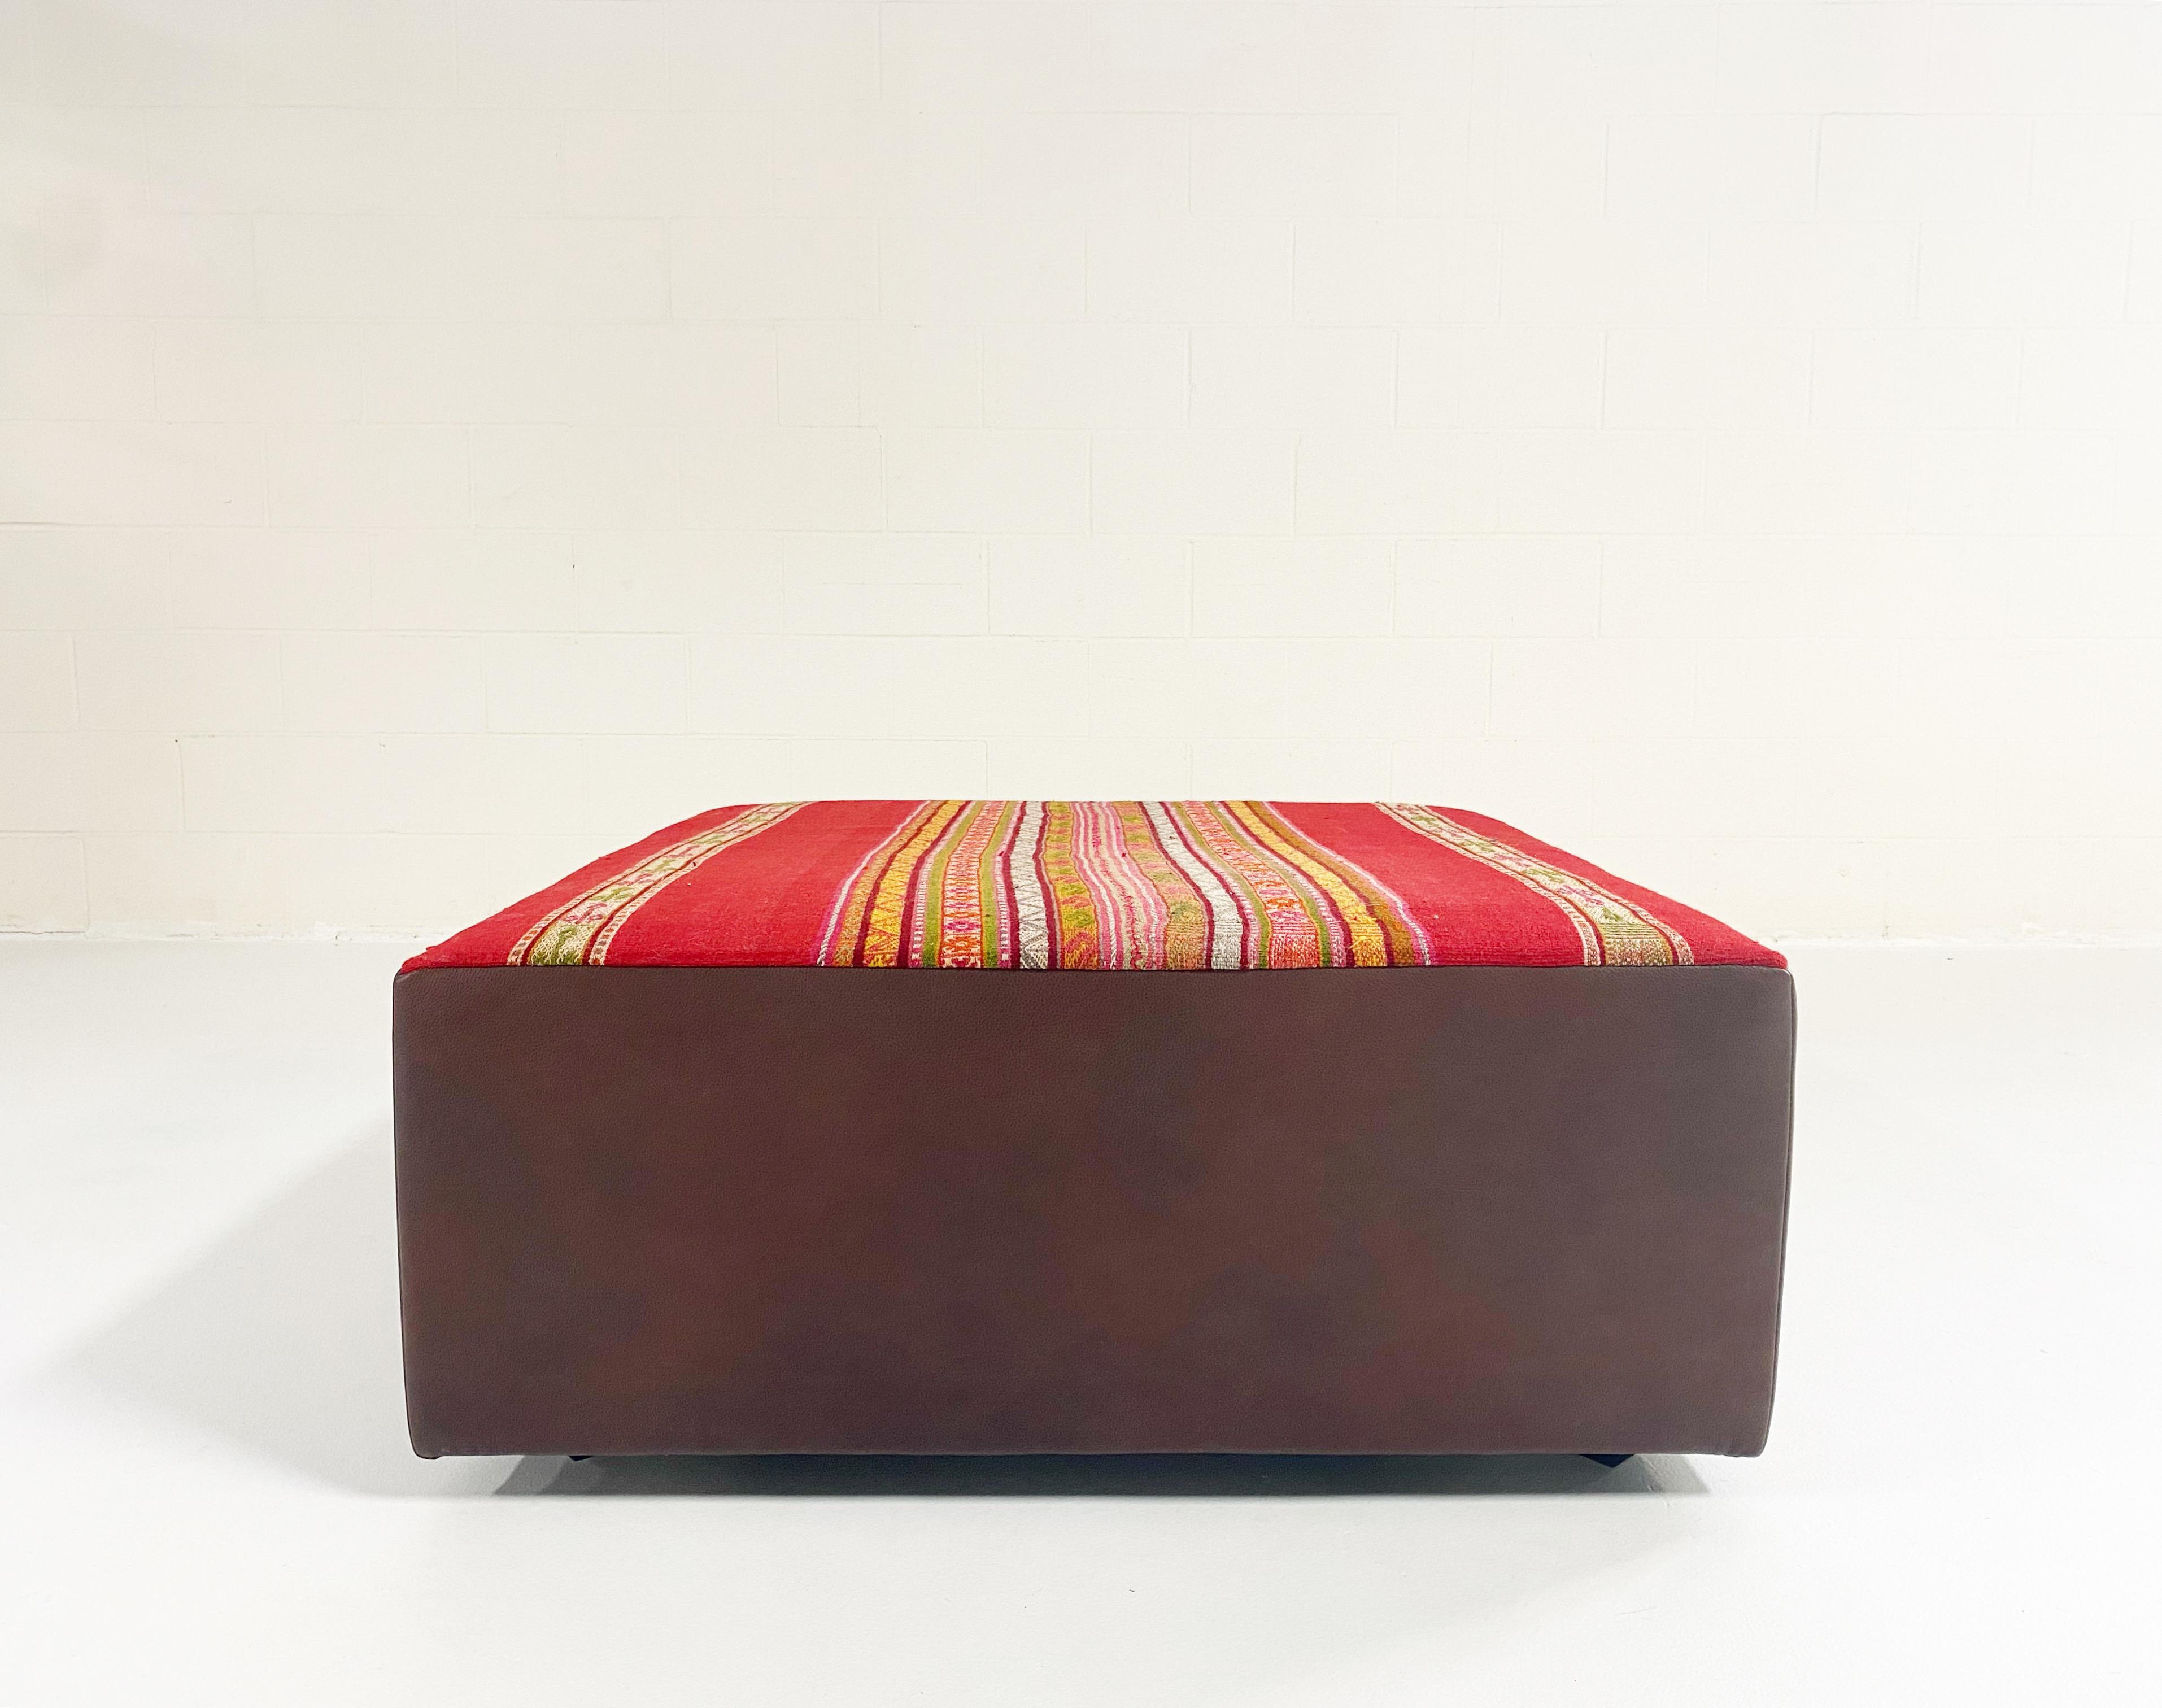 Forsyth One-of-a-kind Ottoman with Vintage Peruvian Textile, Red For Sale 1